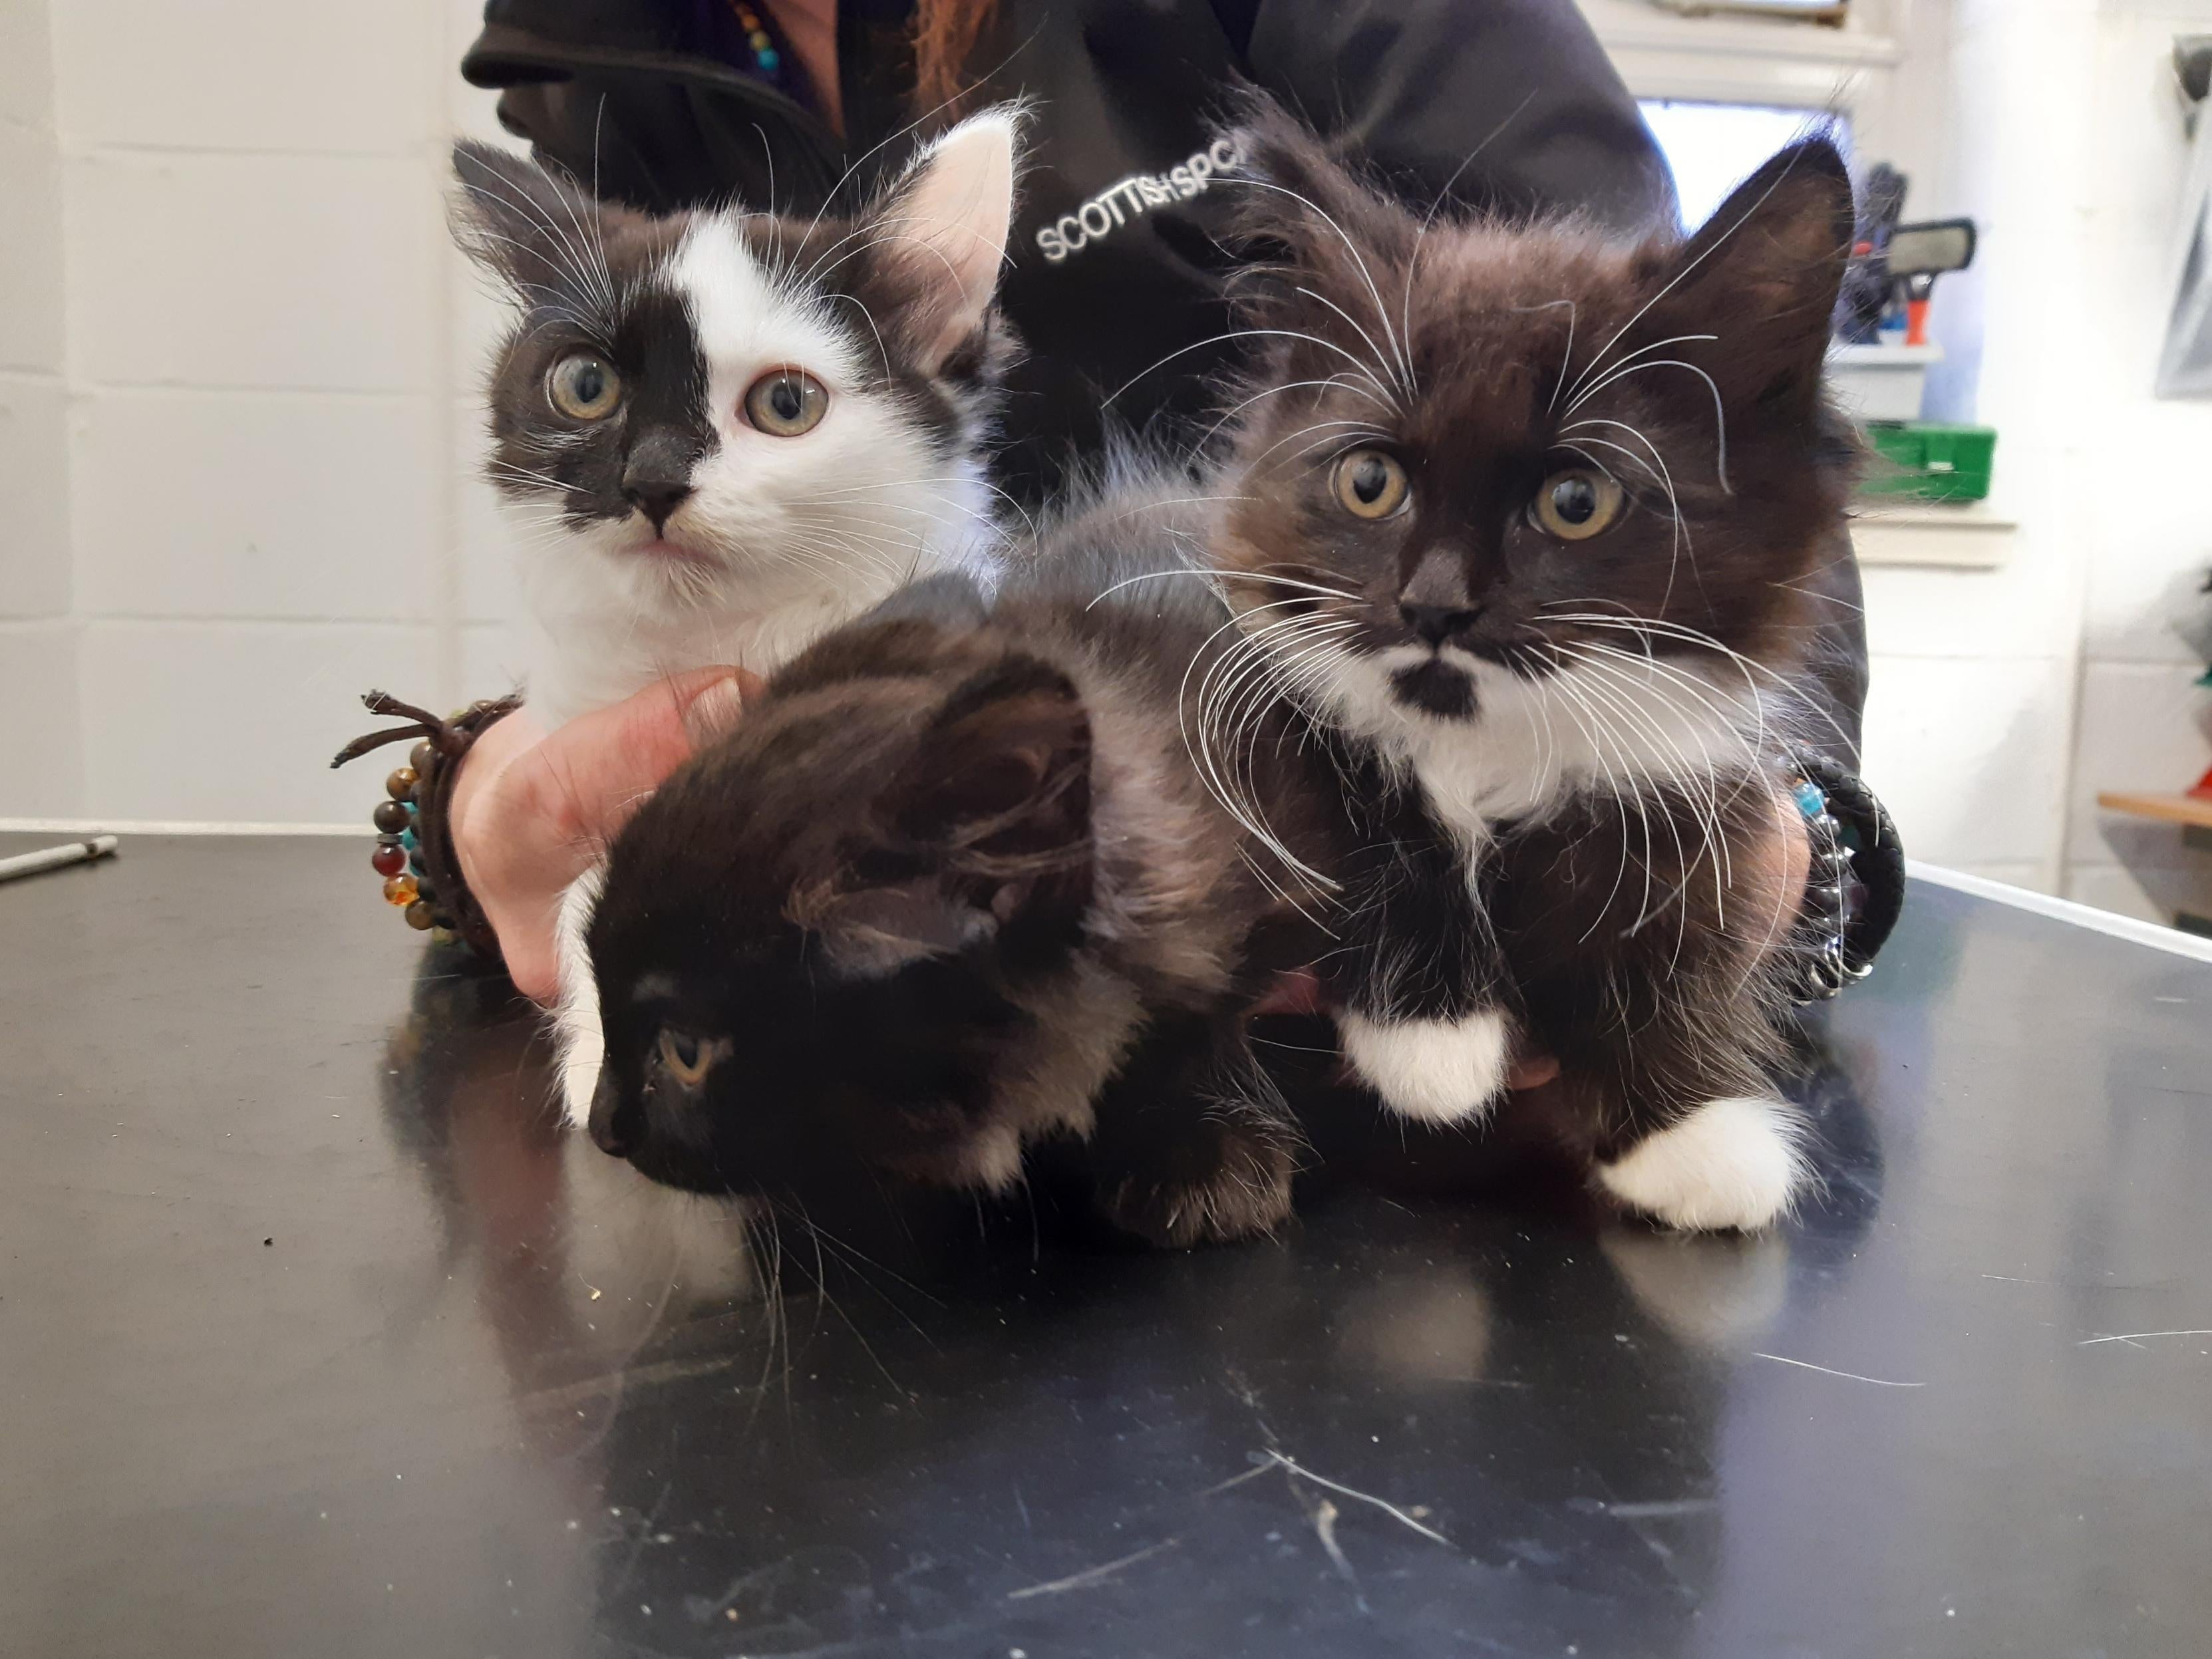 Three kittens, above, were found abandoned in a vodka box in a Scottish park